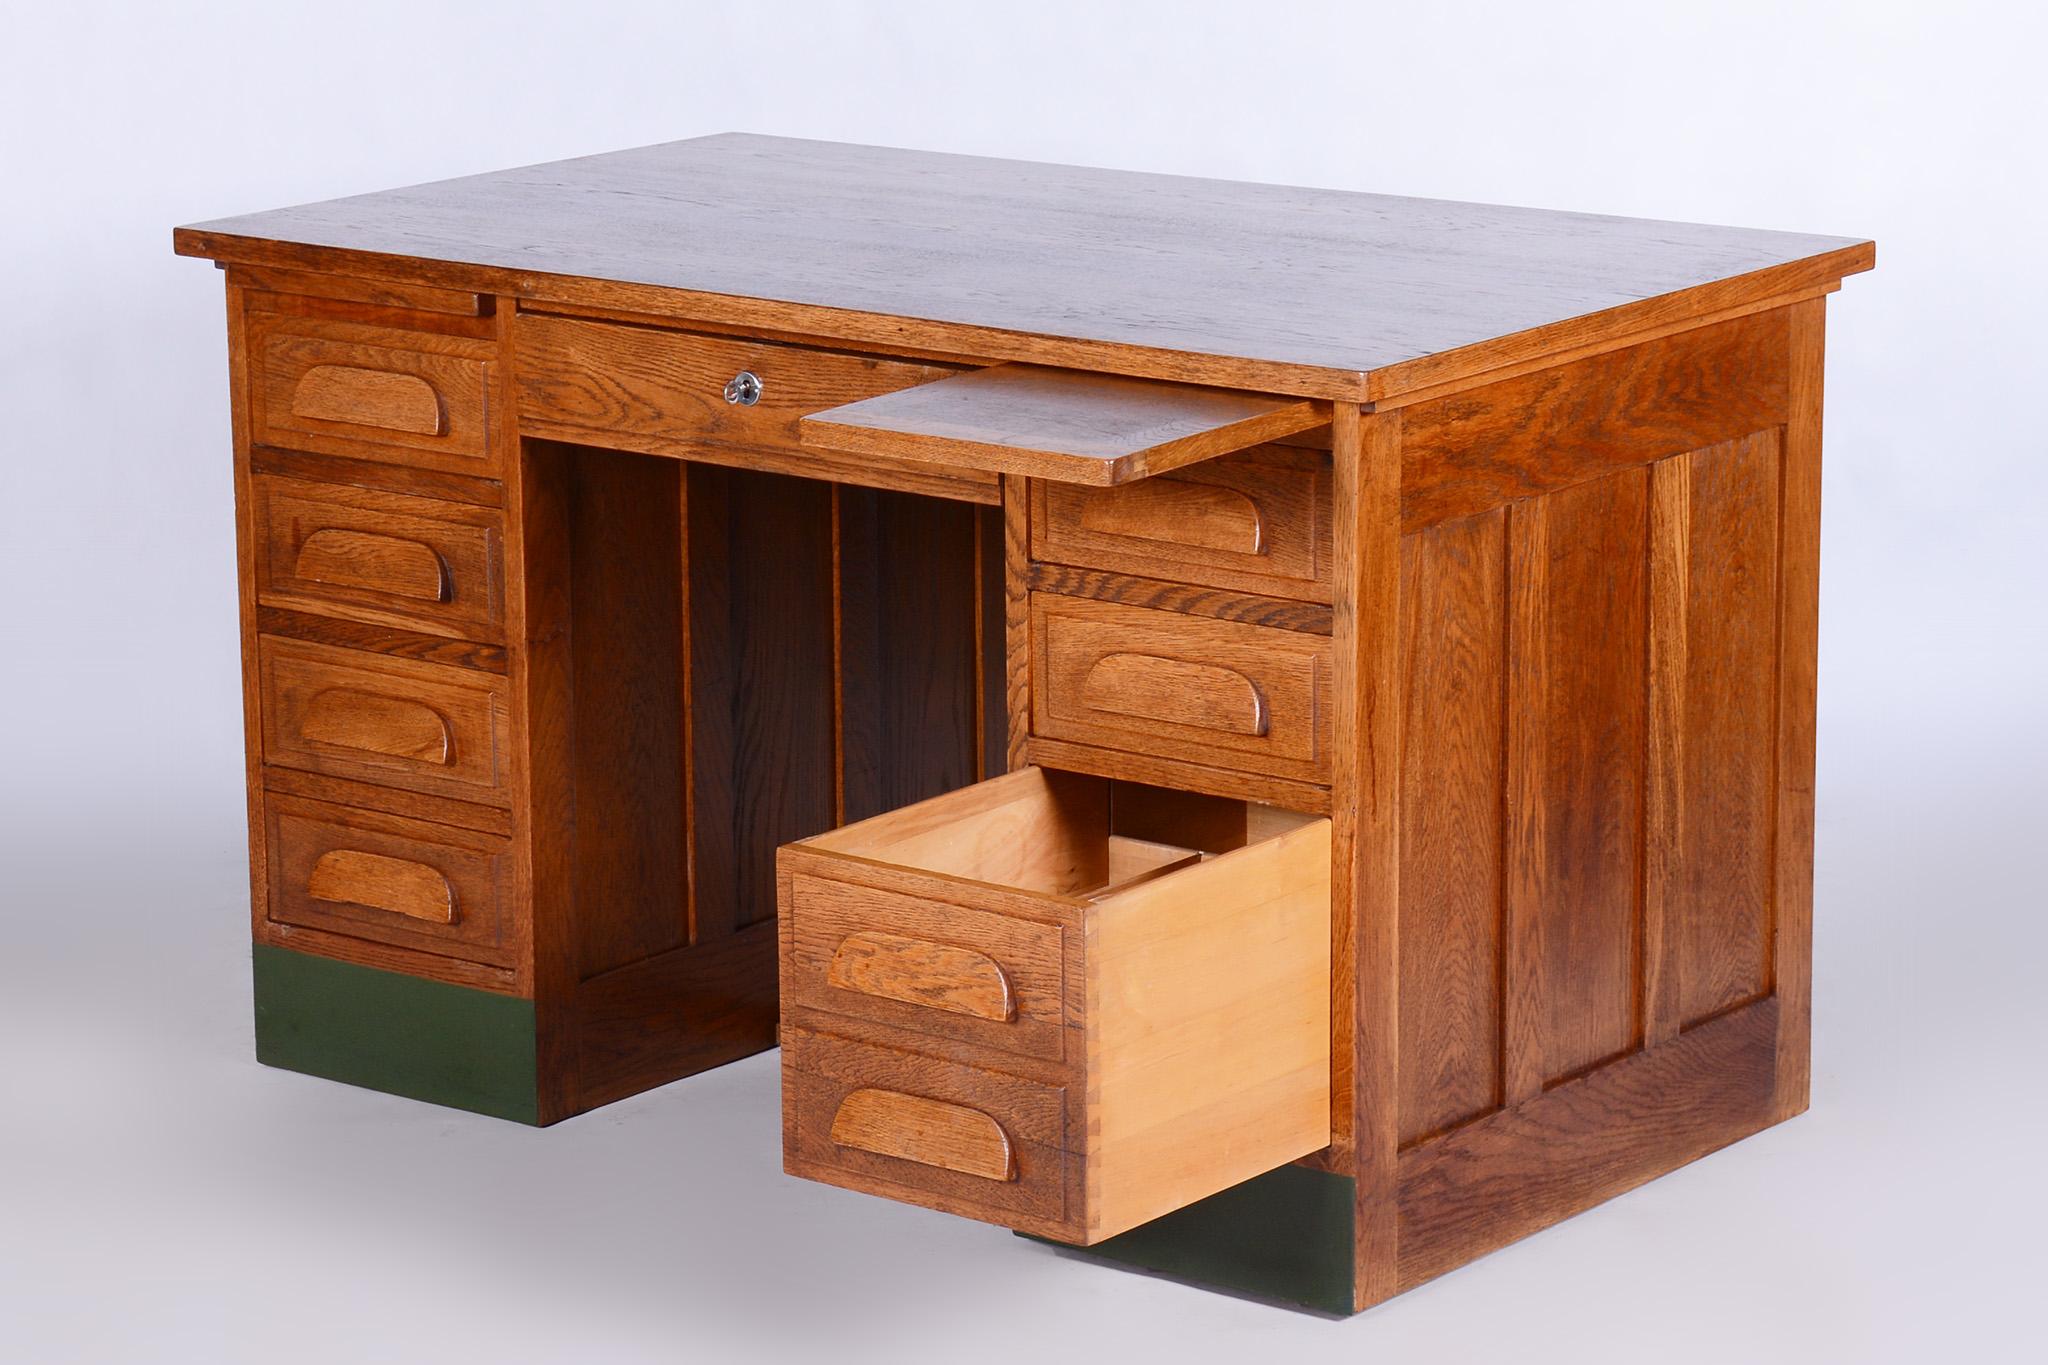 Restored Art Deco Solid Oak Writing Desk Made in the 1930s, Czechia For Sale 5